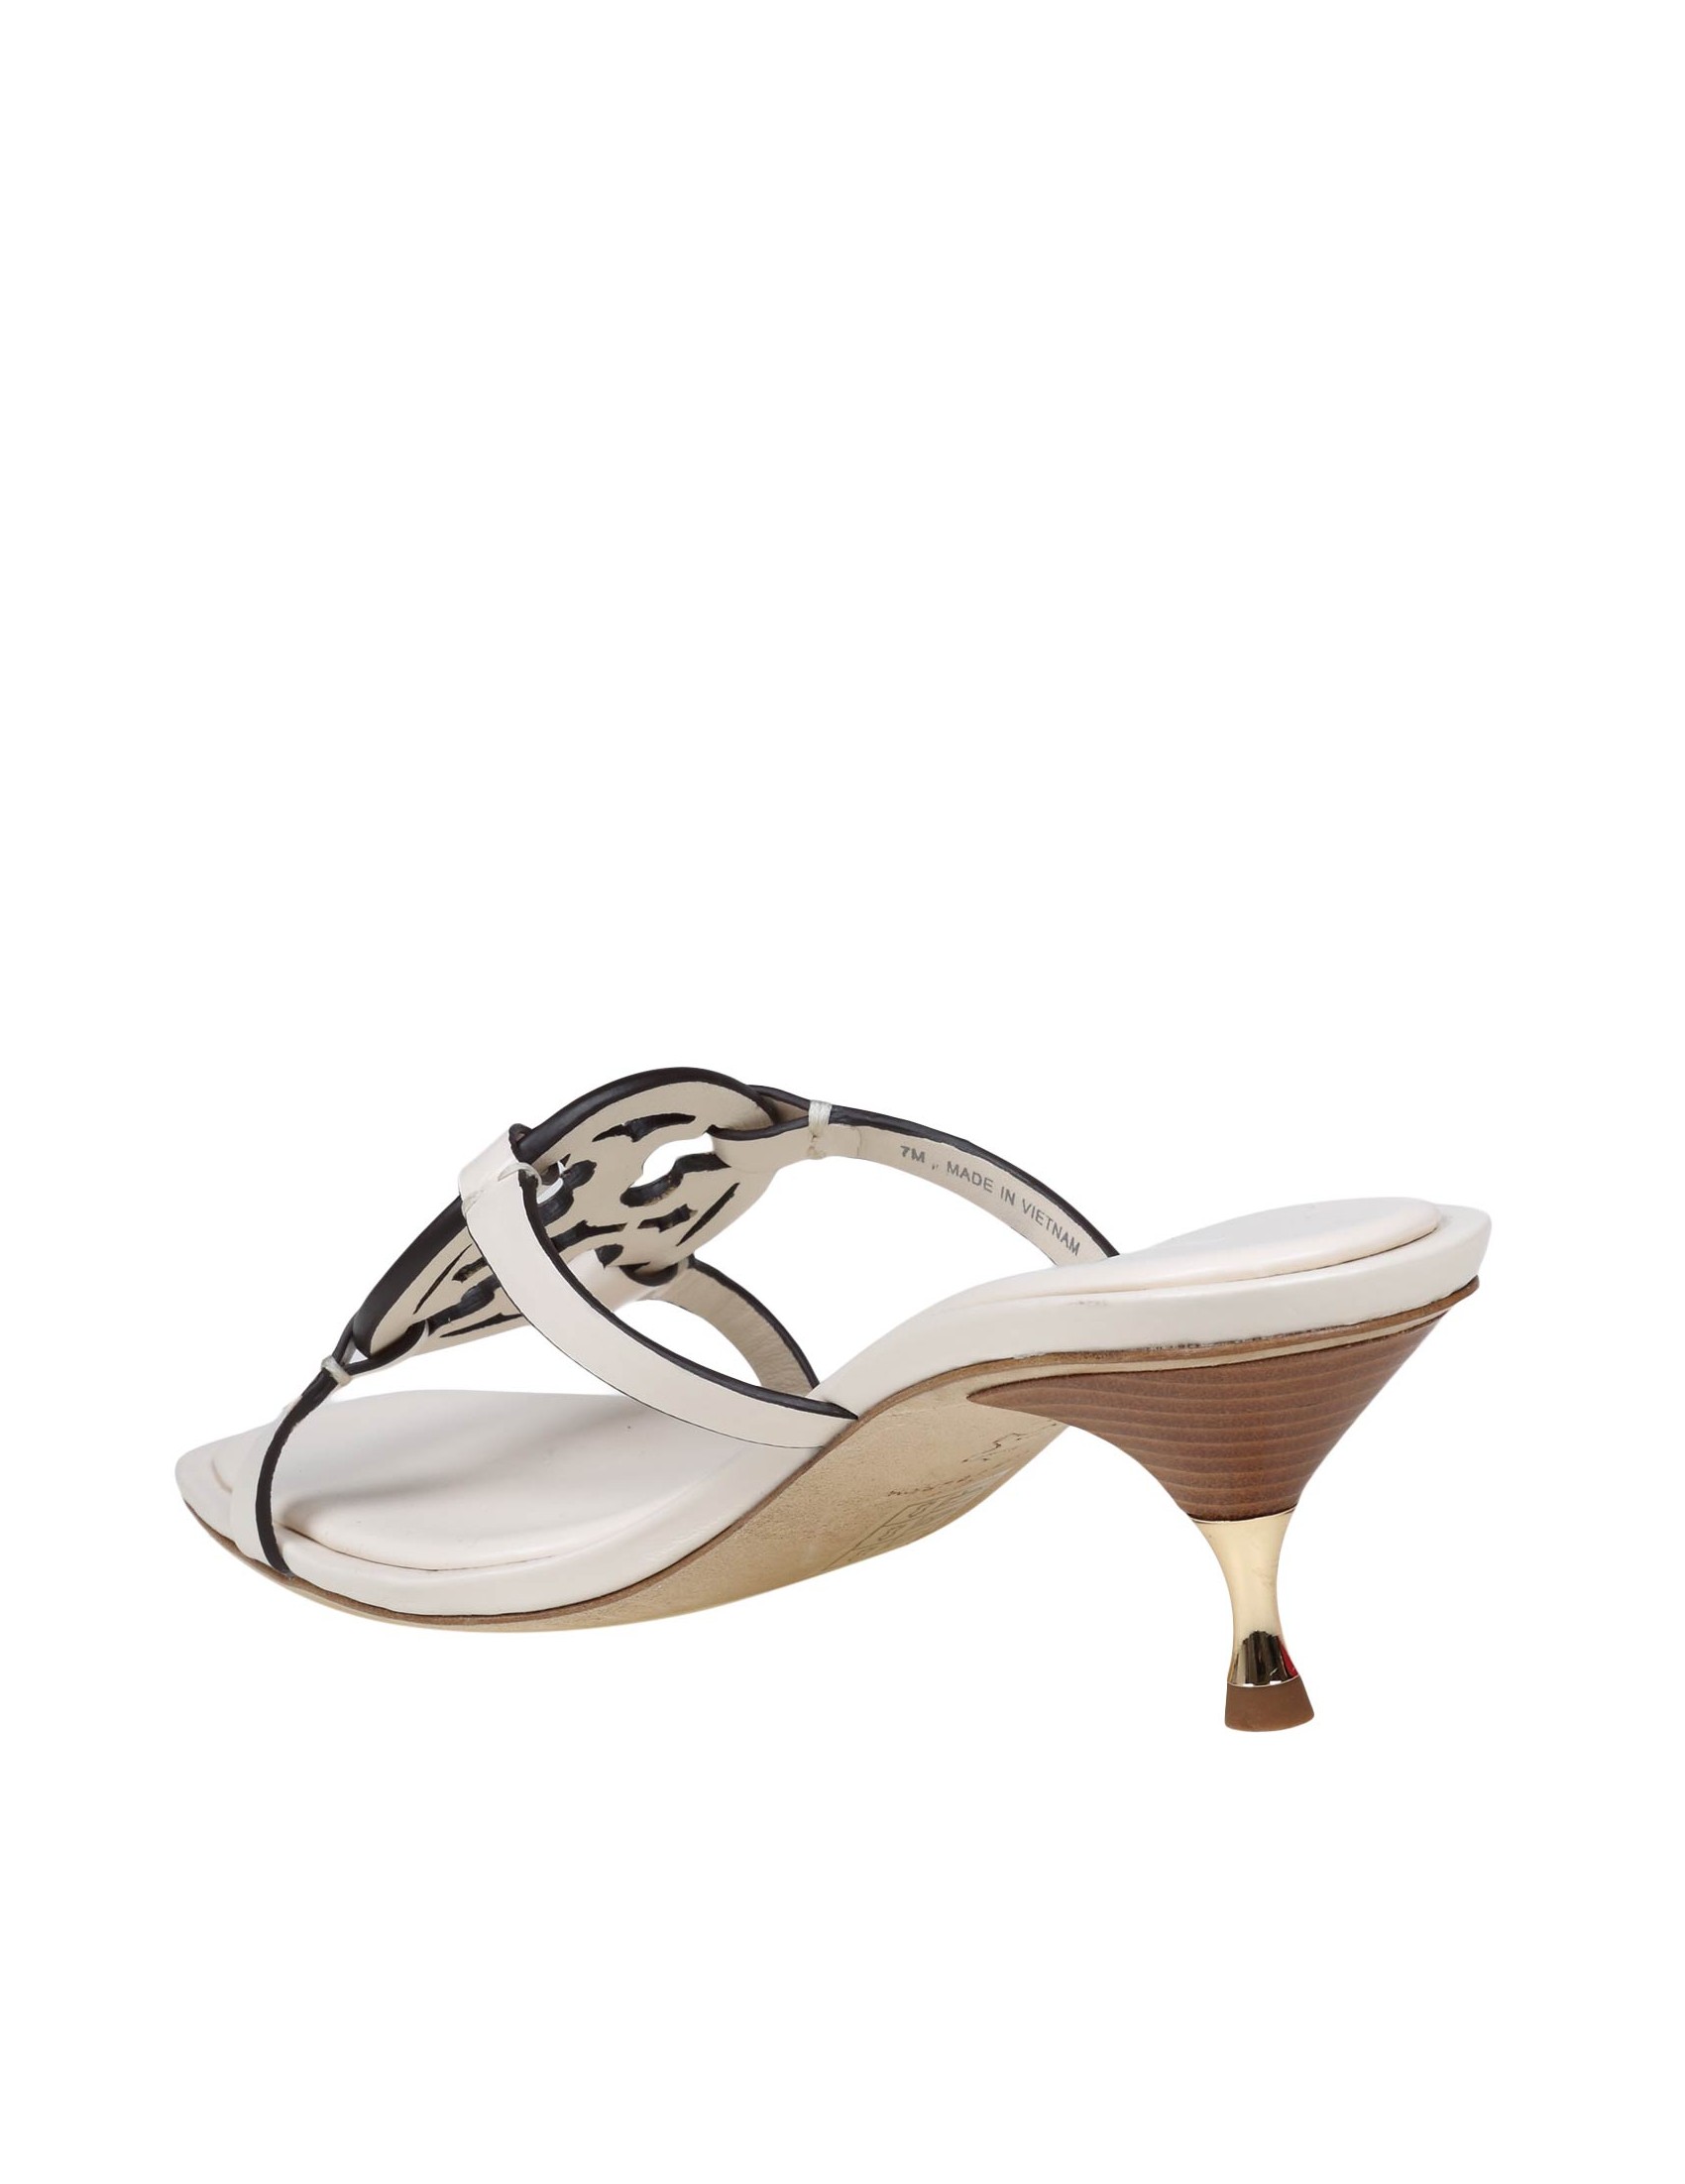 TORY BURCH MILLER SANDAL IN CREAM COLOR LEATHER